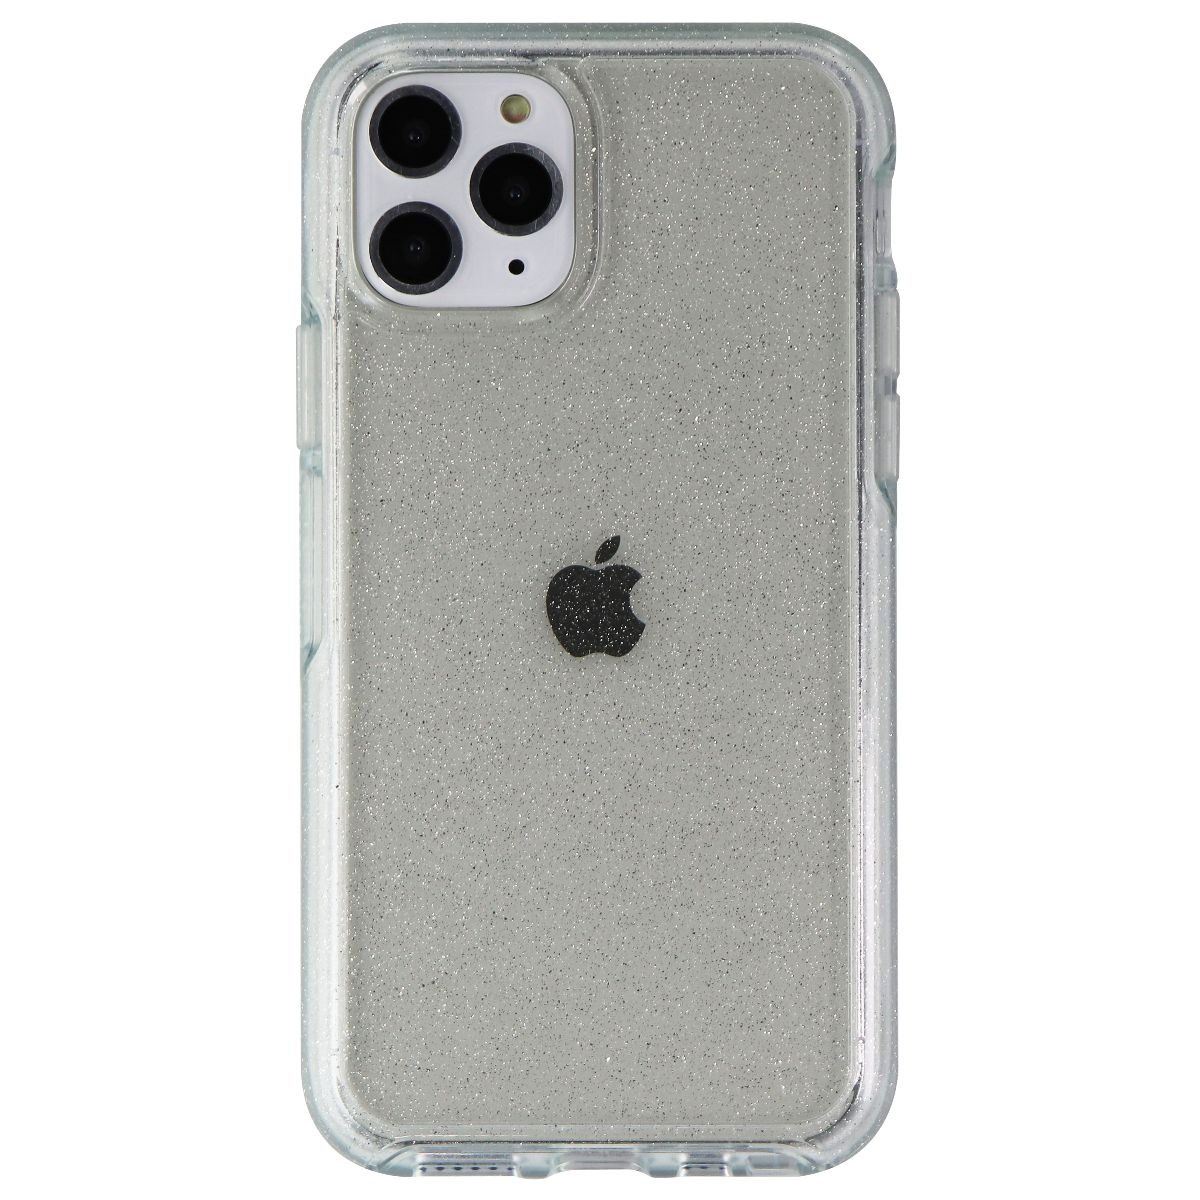 OtterBox Symmetry Series Case for Apple iPhone 11 Pro - Stardust (Used) - image 2 of 2